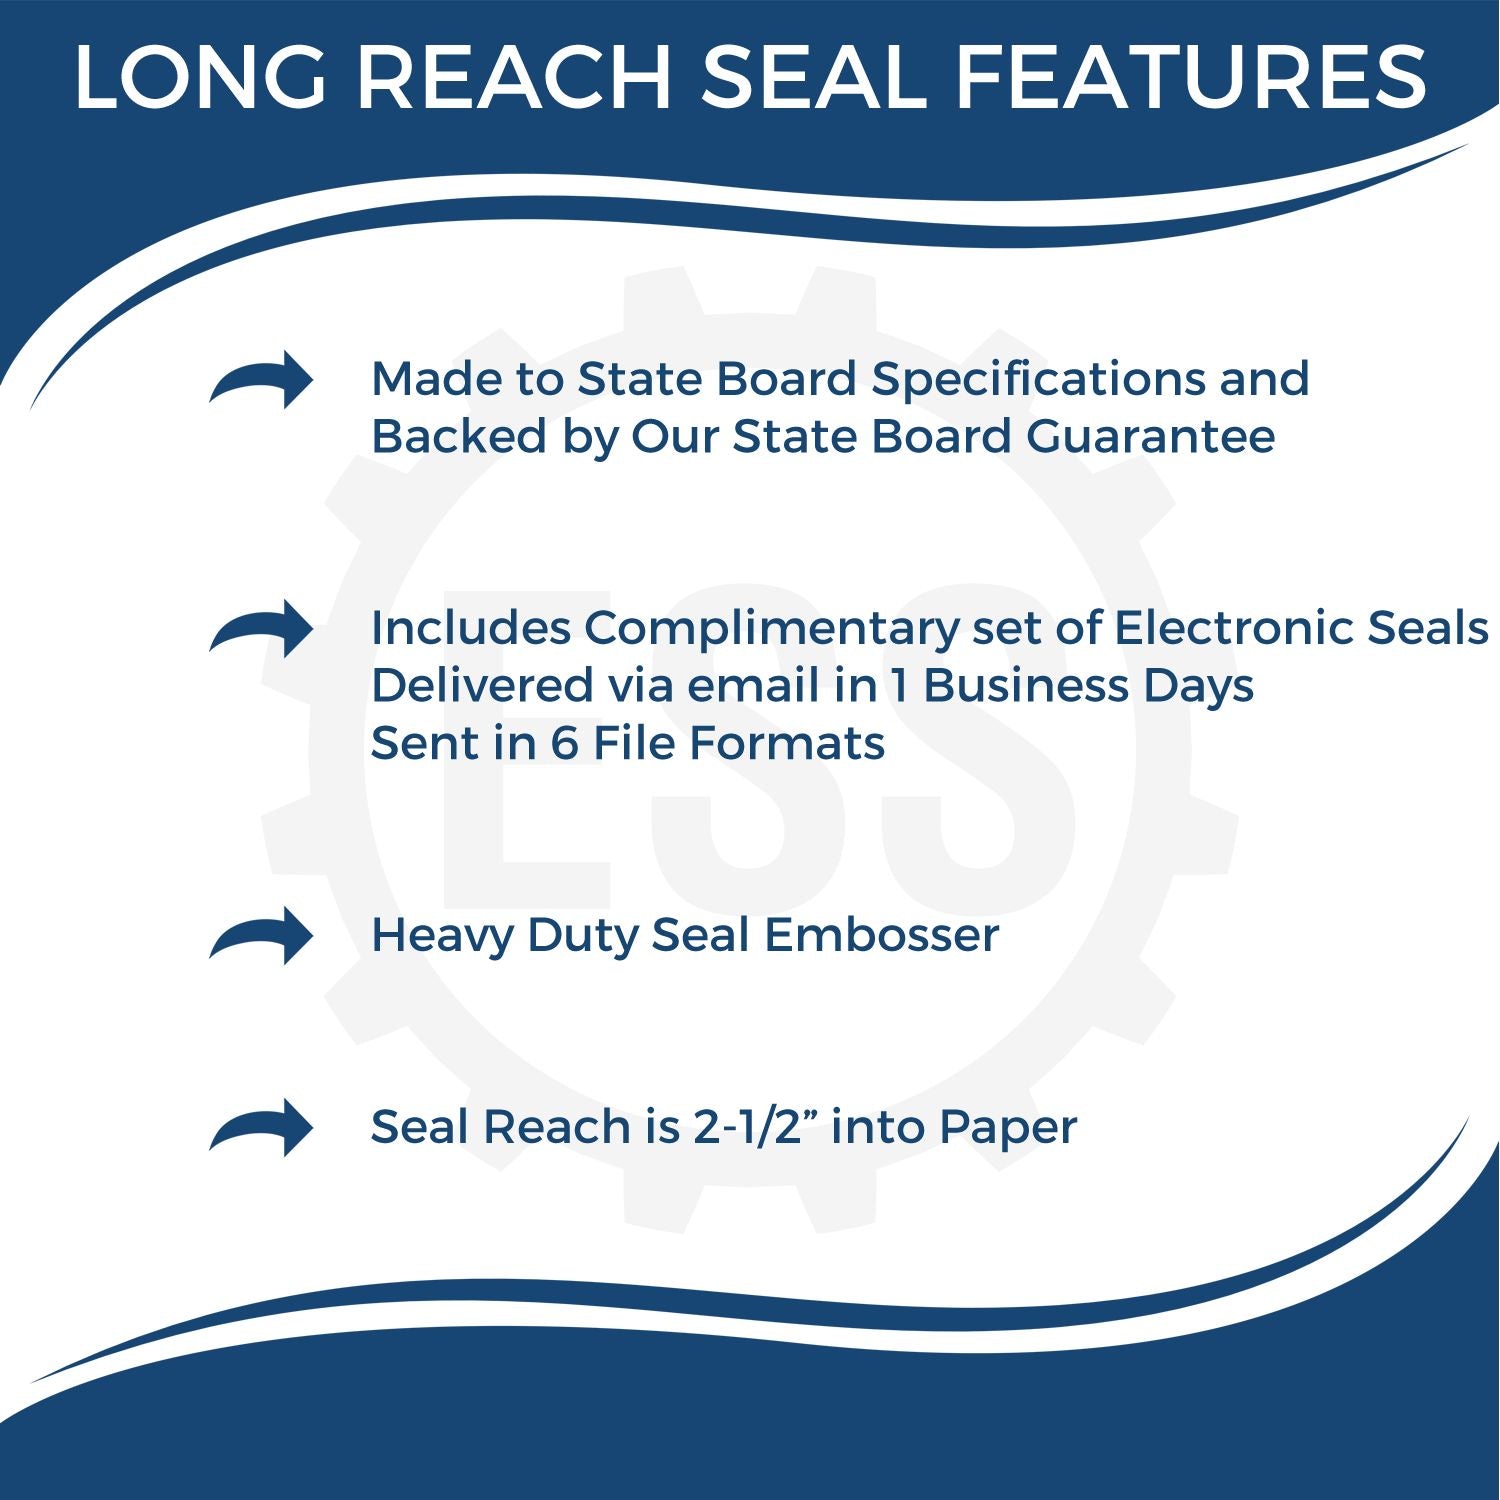 The main image for the Long Reach New Hampshire PE Seal depicting a sample of the imprint and electronic files